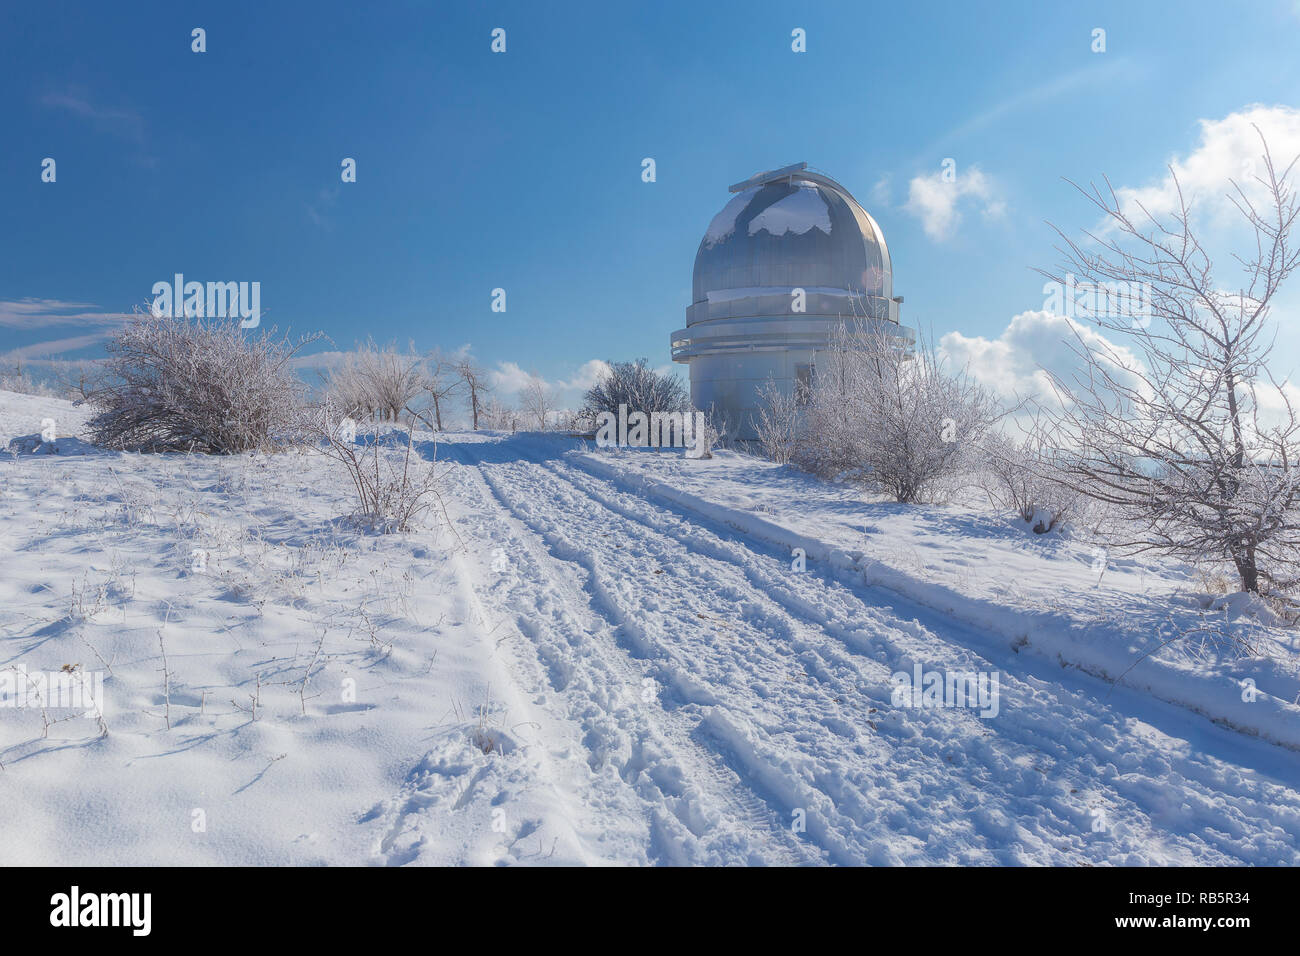 Small dome of the telescope at the Shemakha Observatory in winter Stock Photo